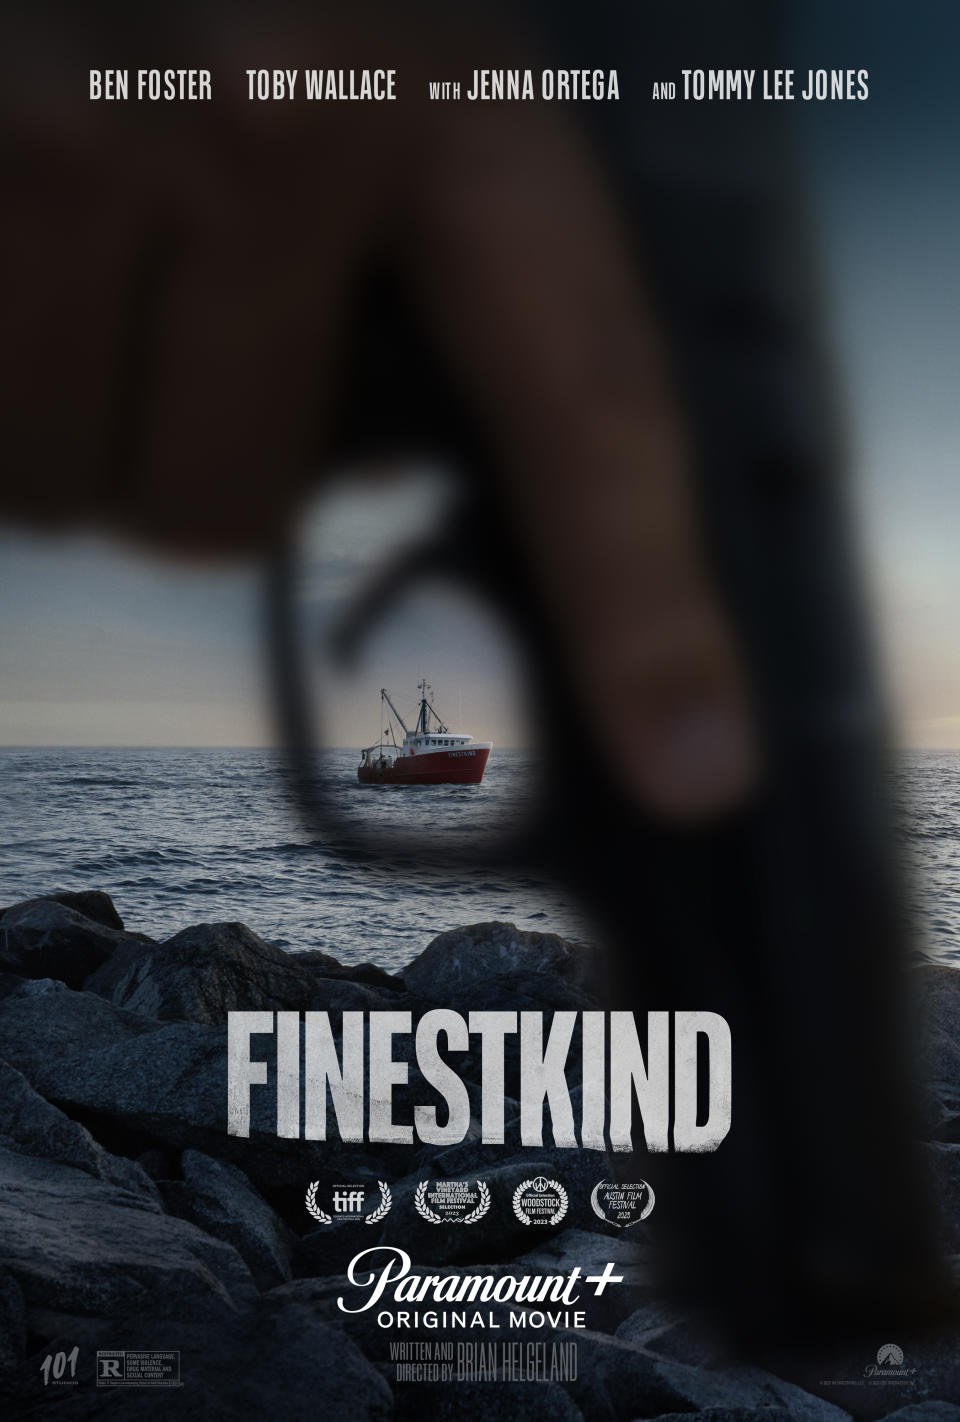 Finestkind streaming on Paramount+